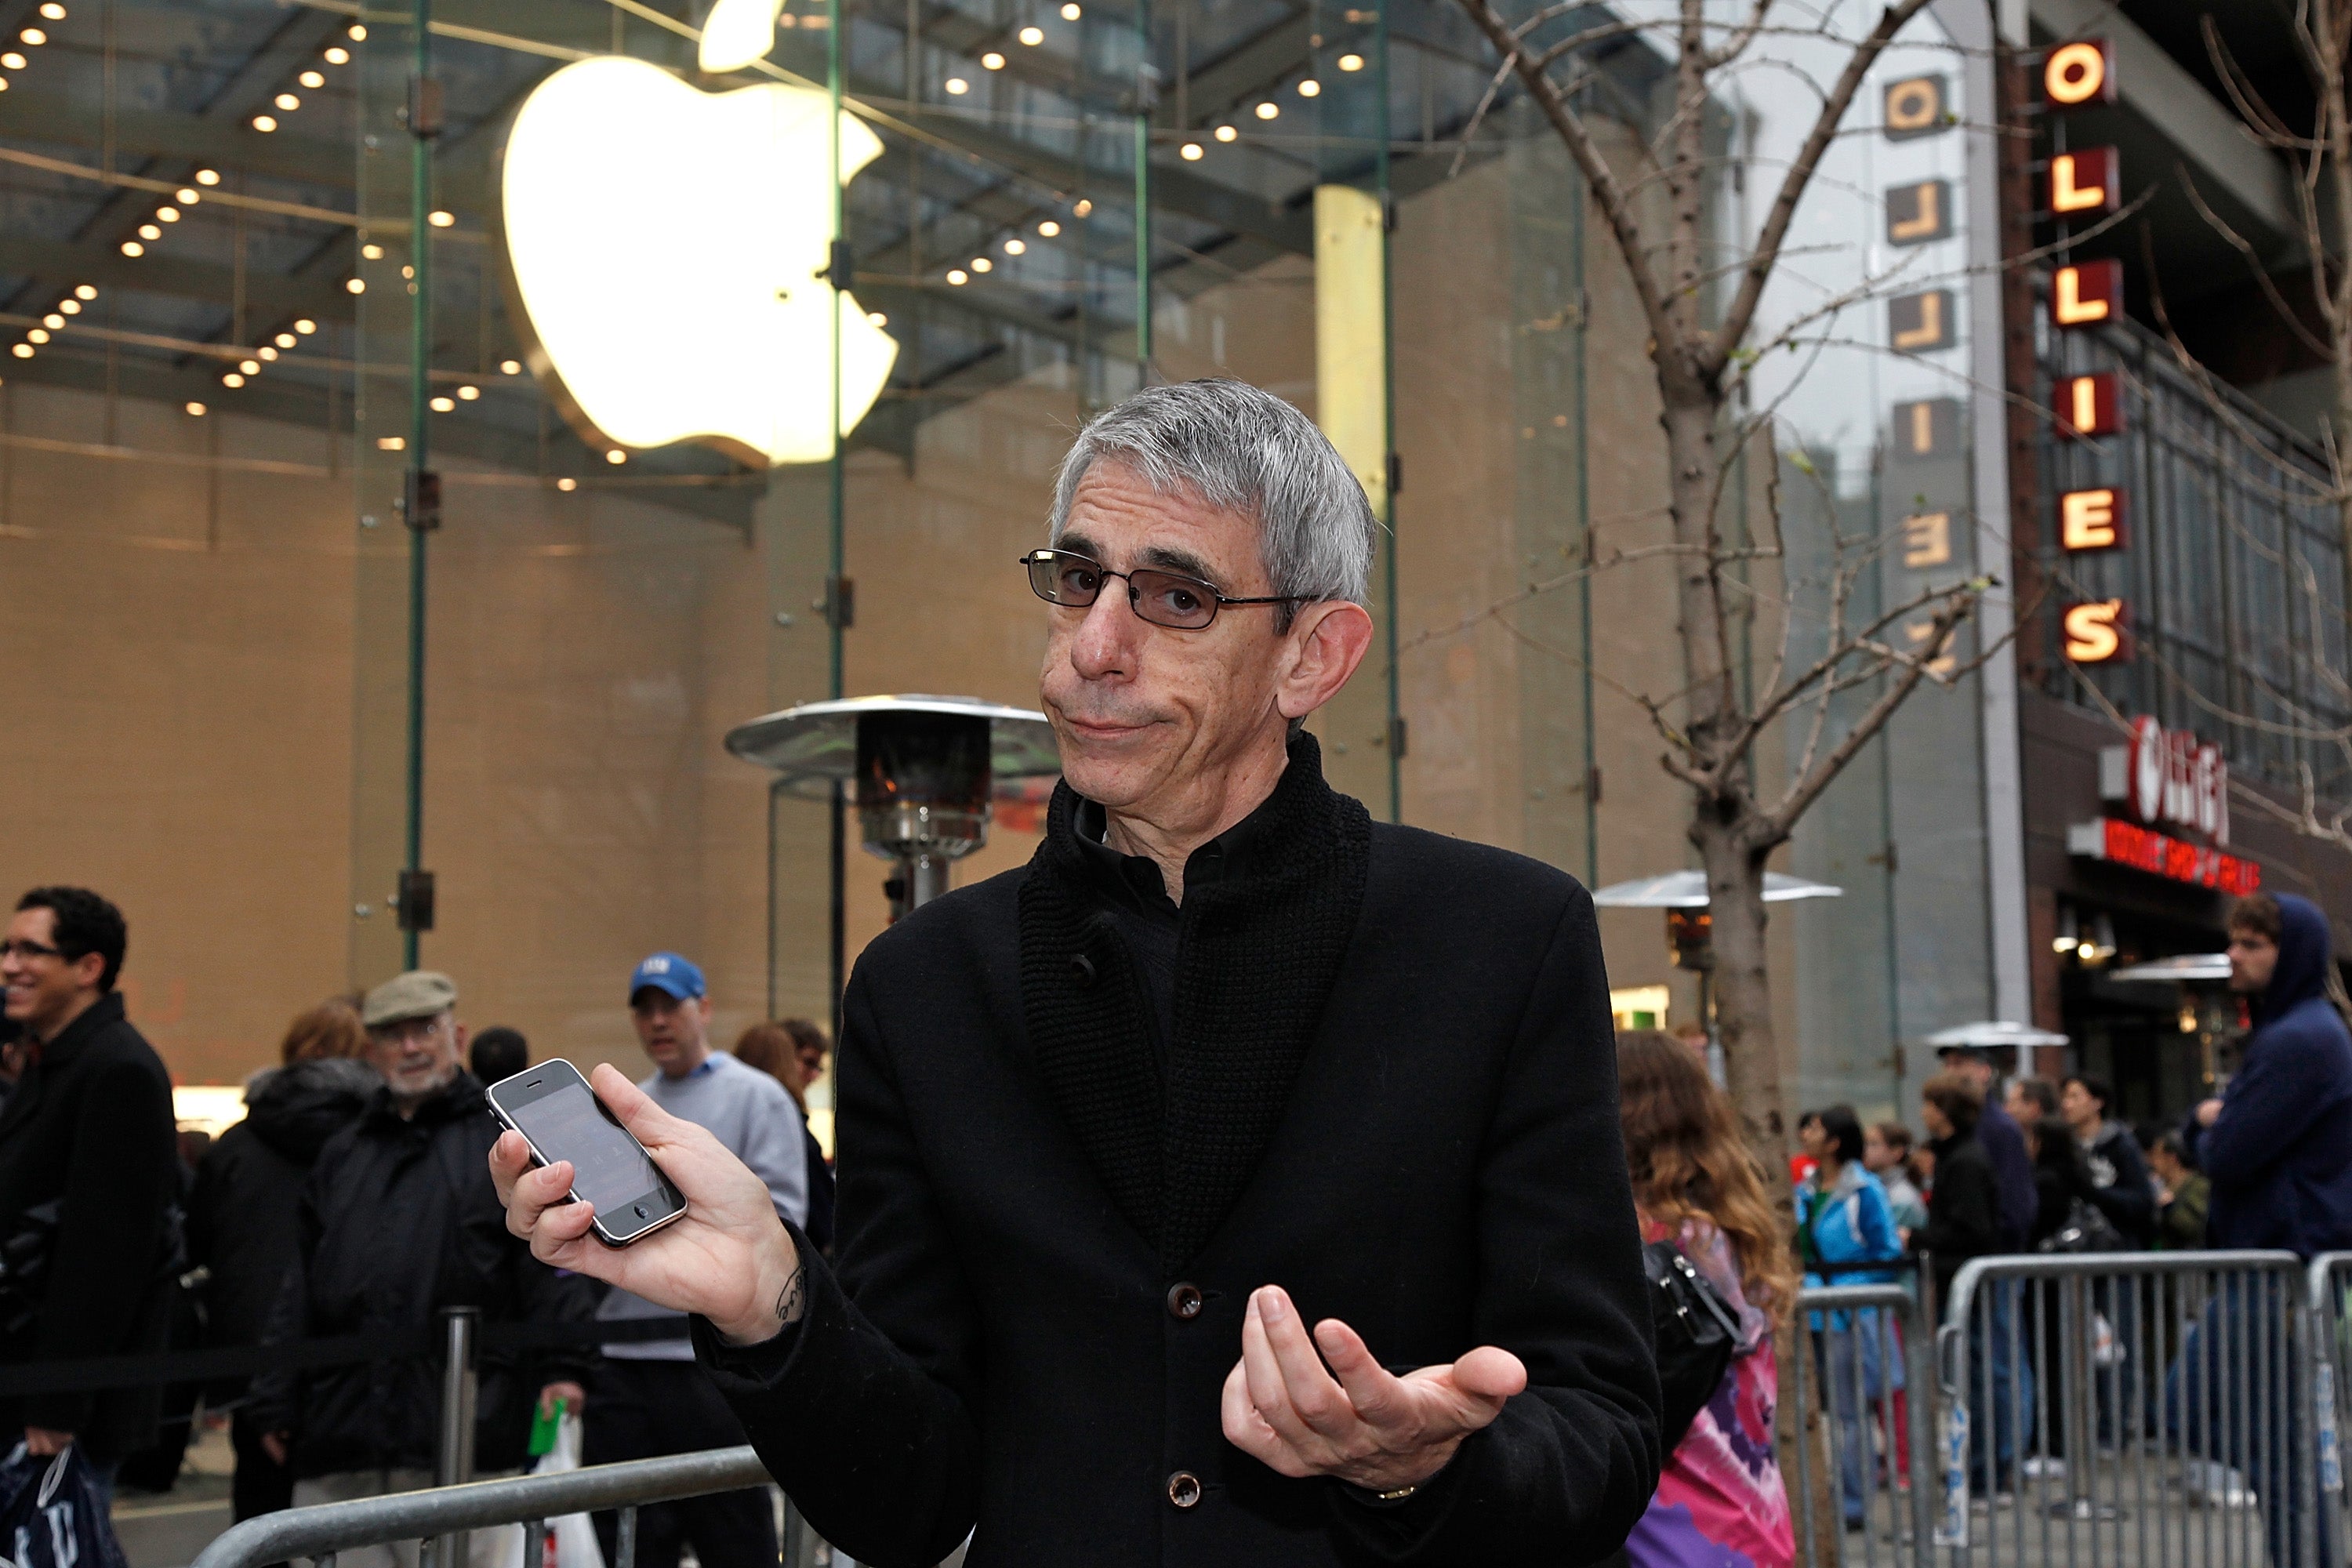 Actor Richard Belzer attends the grand opening of the Apple Store on the Upper West Side on November 14, 2009 in New York City.